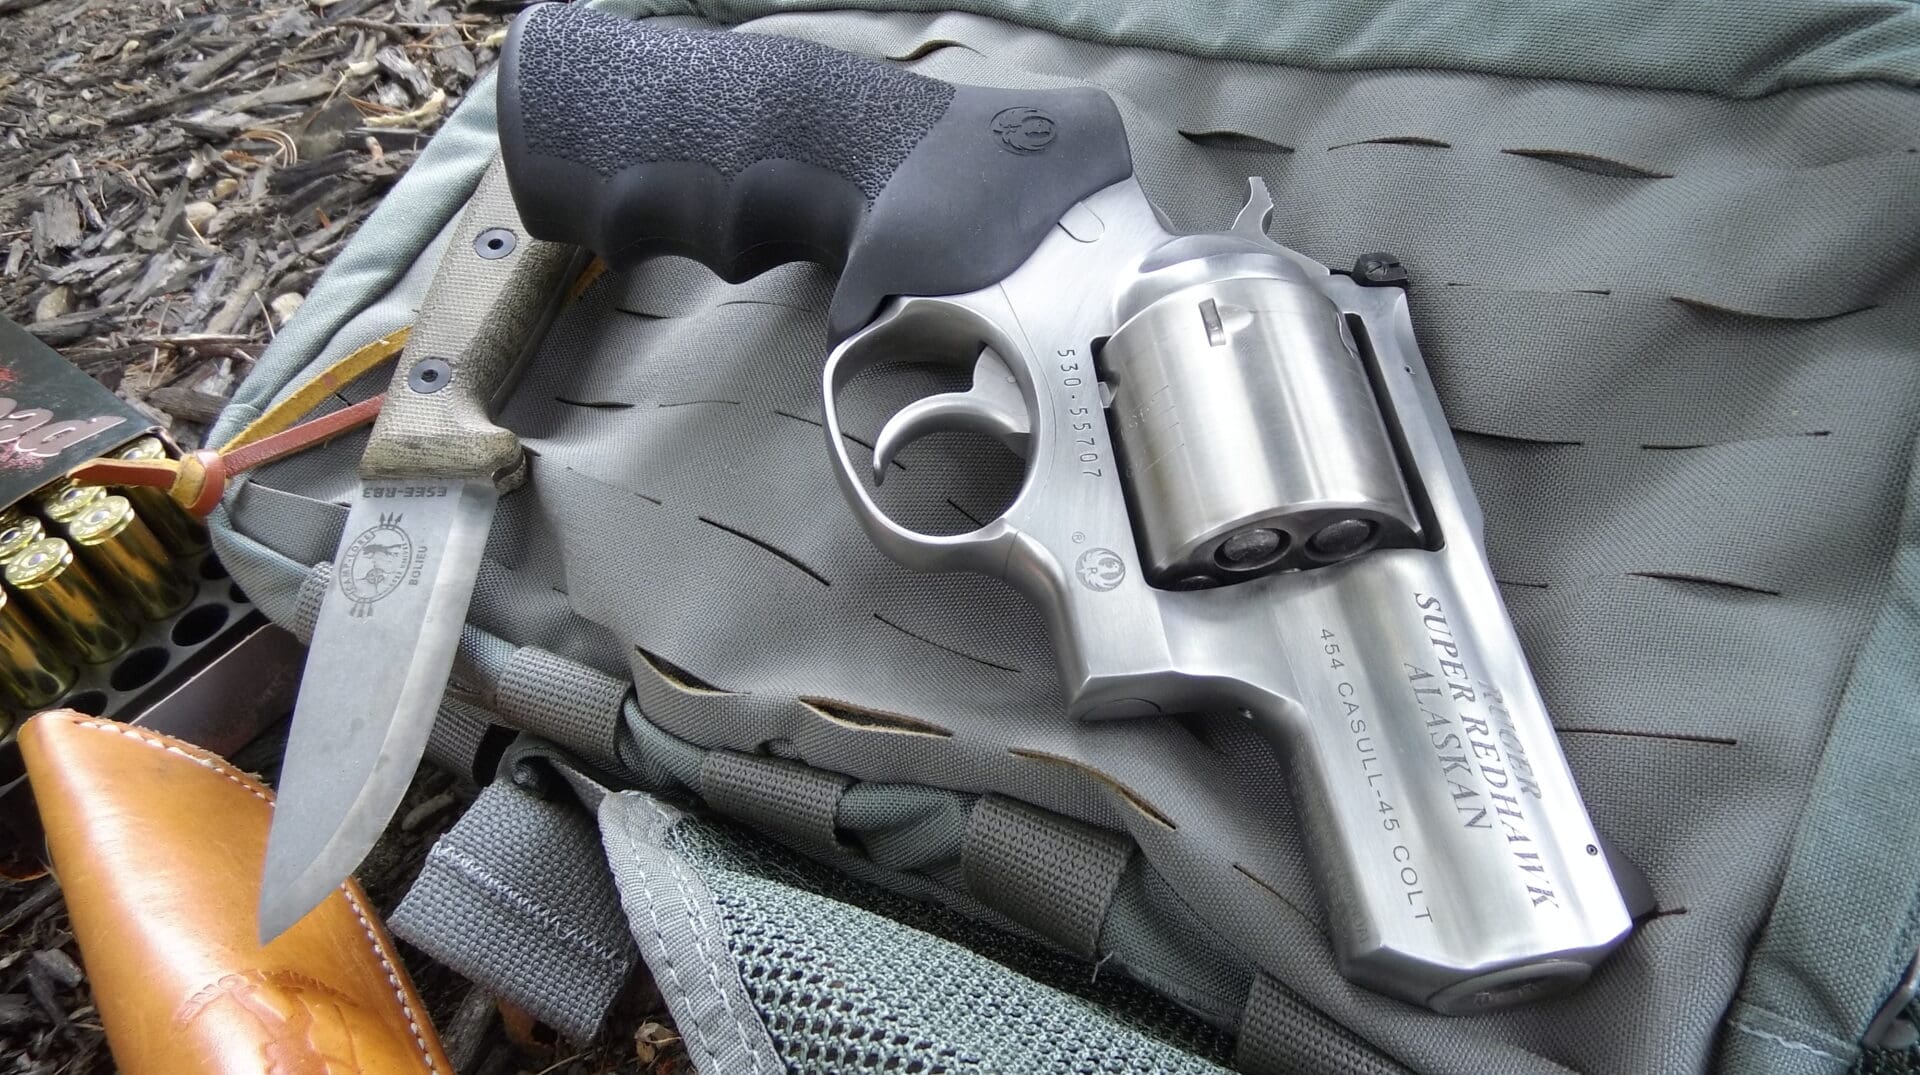 Gun Review: Ruger Super Redhawk Alaskan Revolver - The Truth About